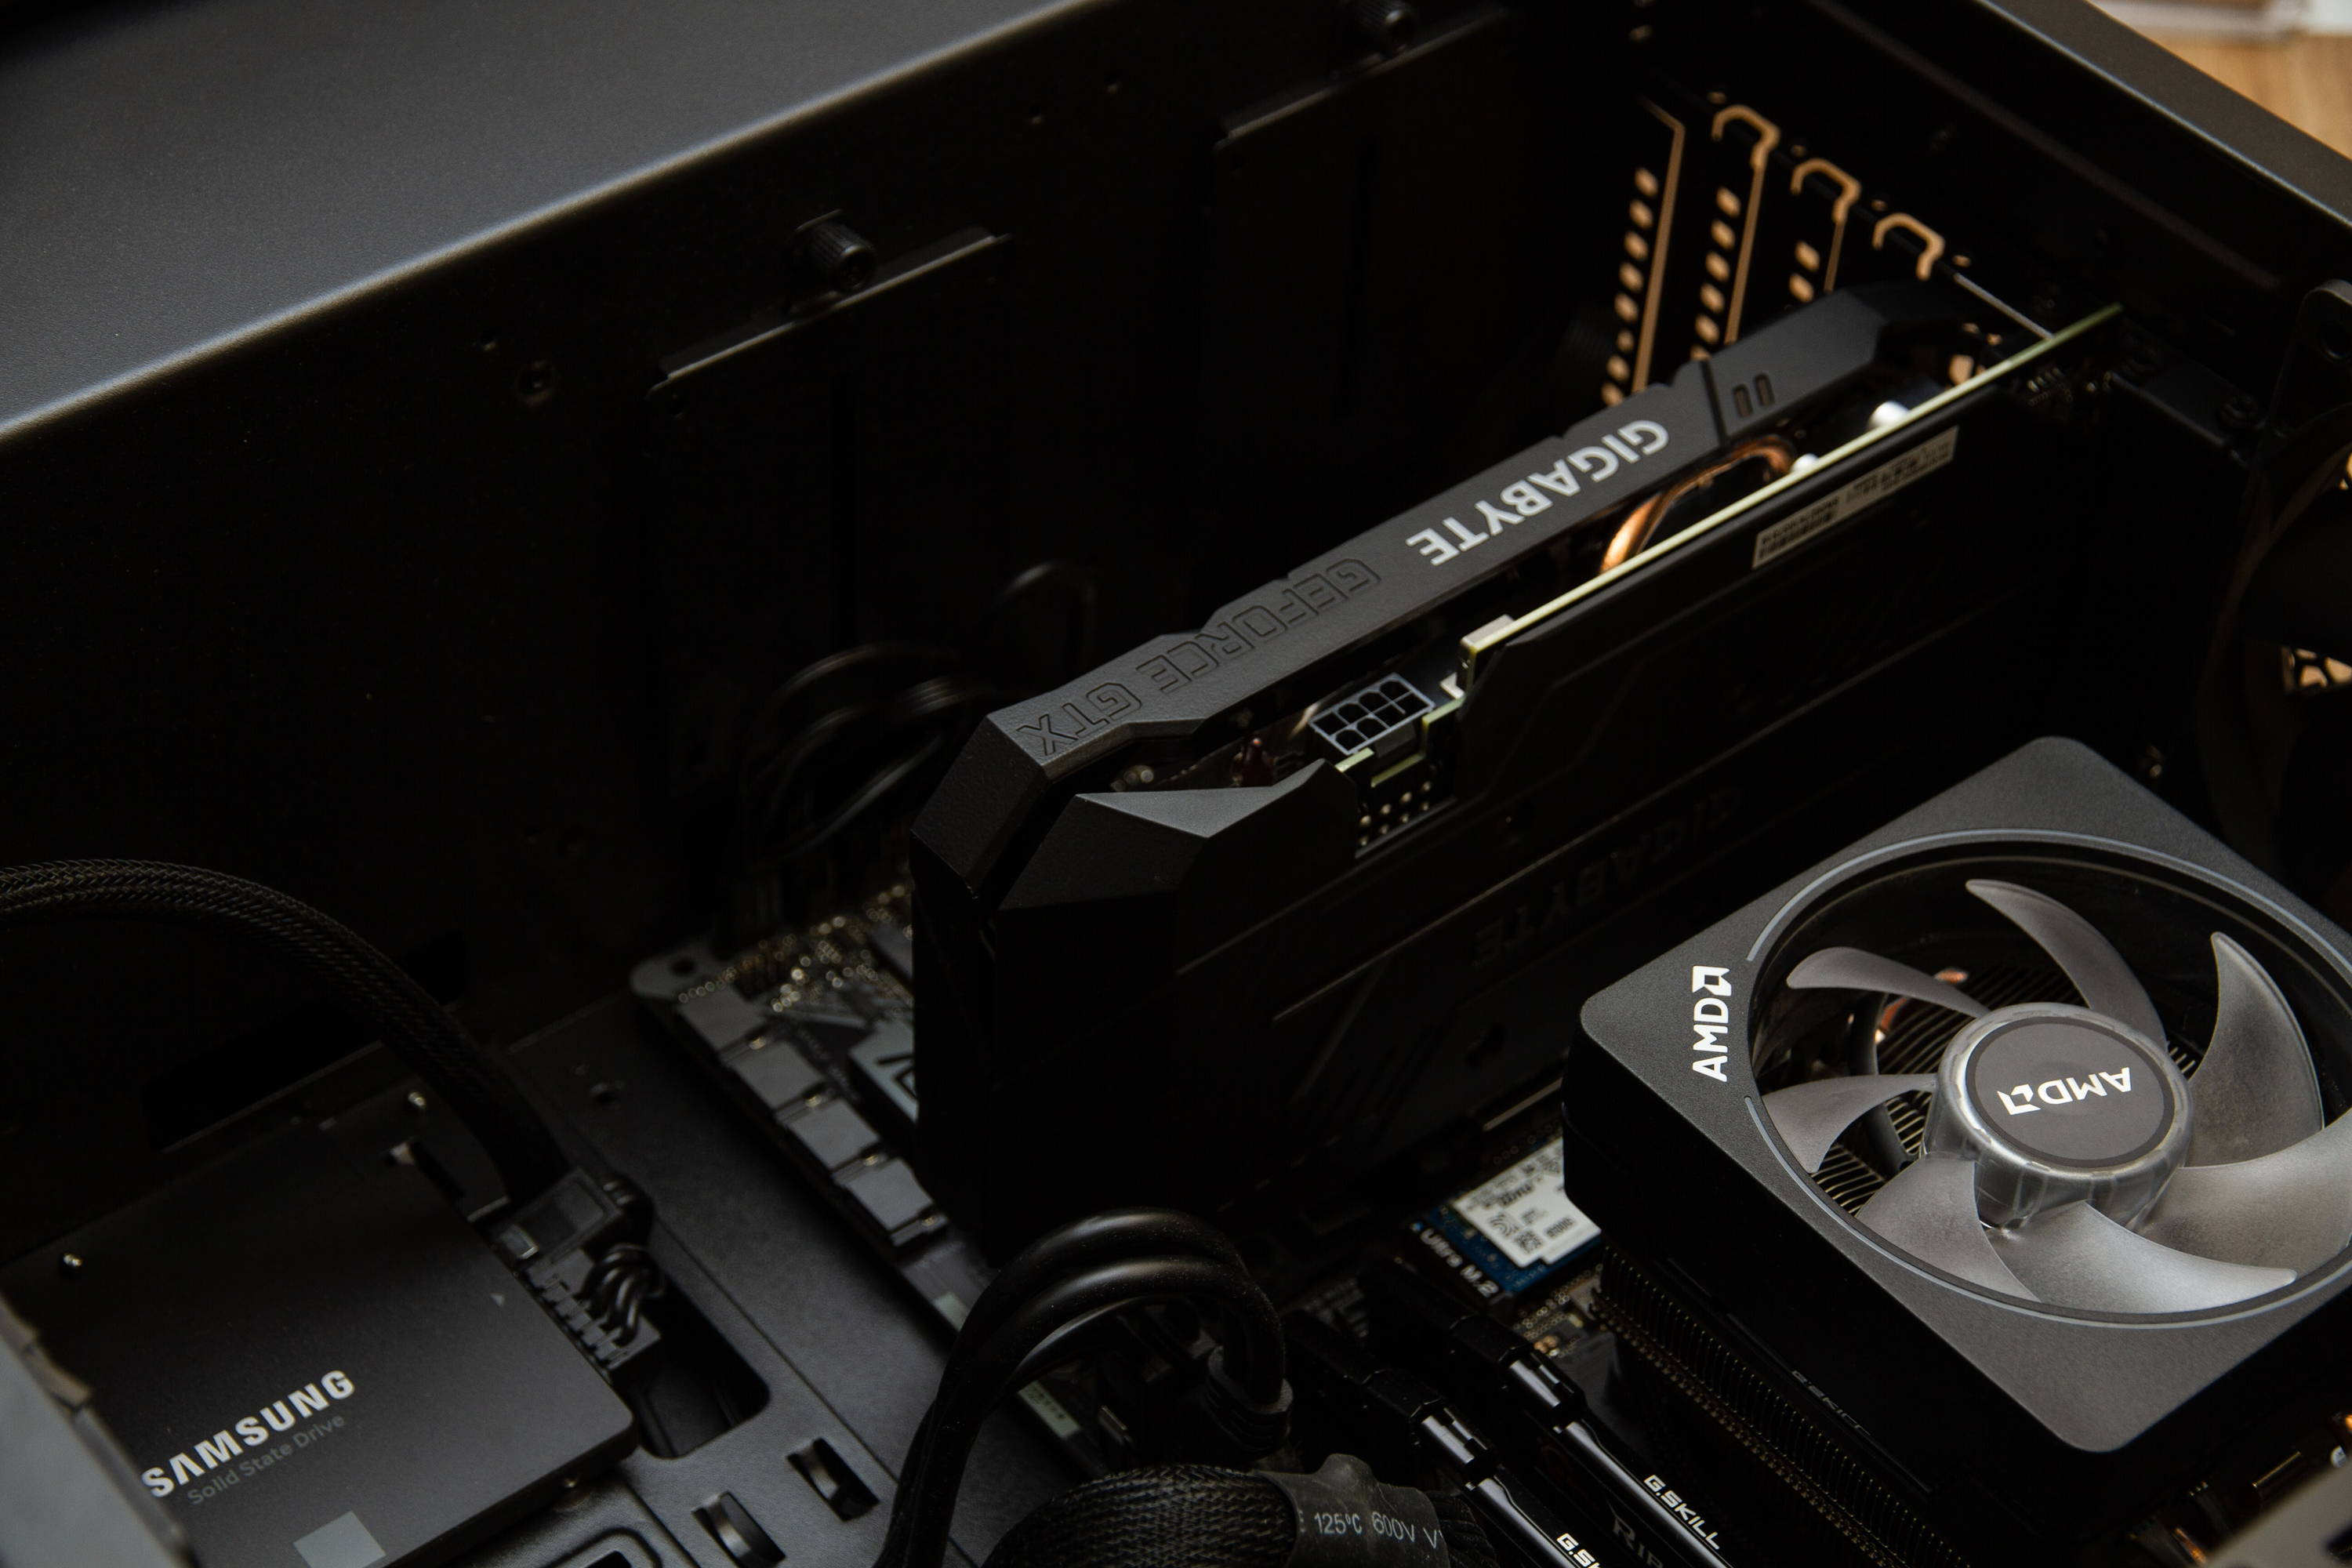 Hand built and crafted design of Radium PCs ensure aesthetics and performance